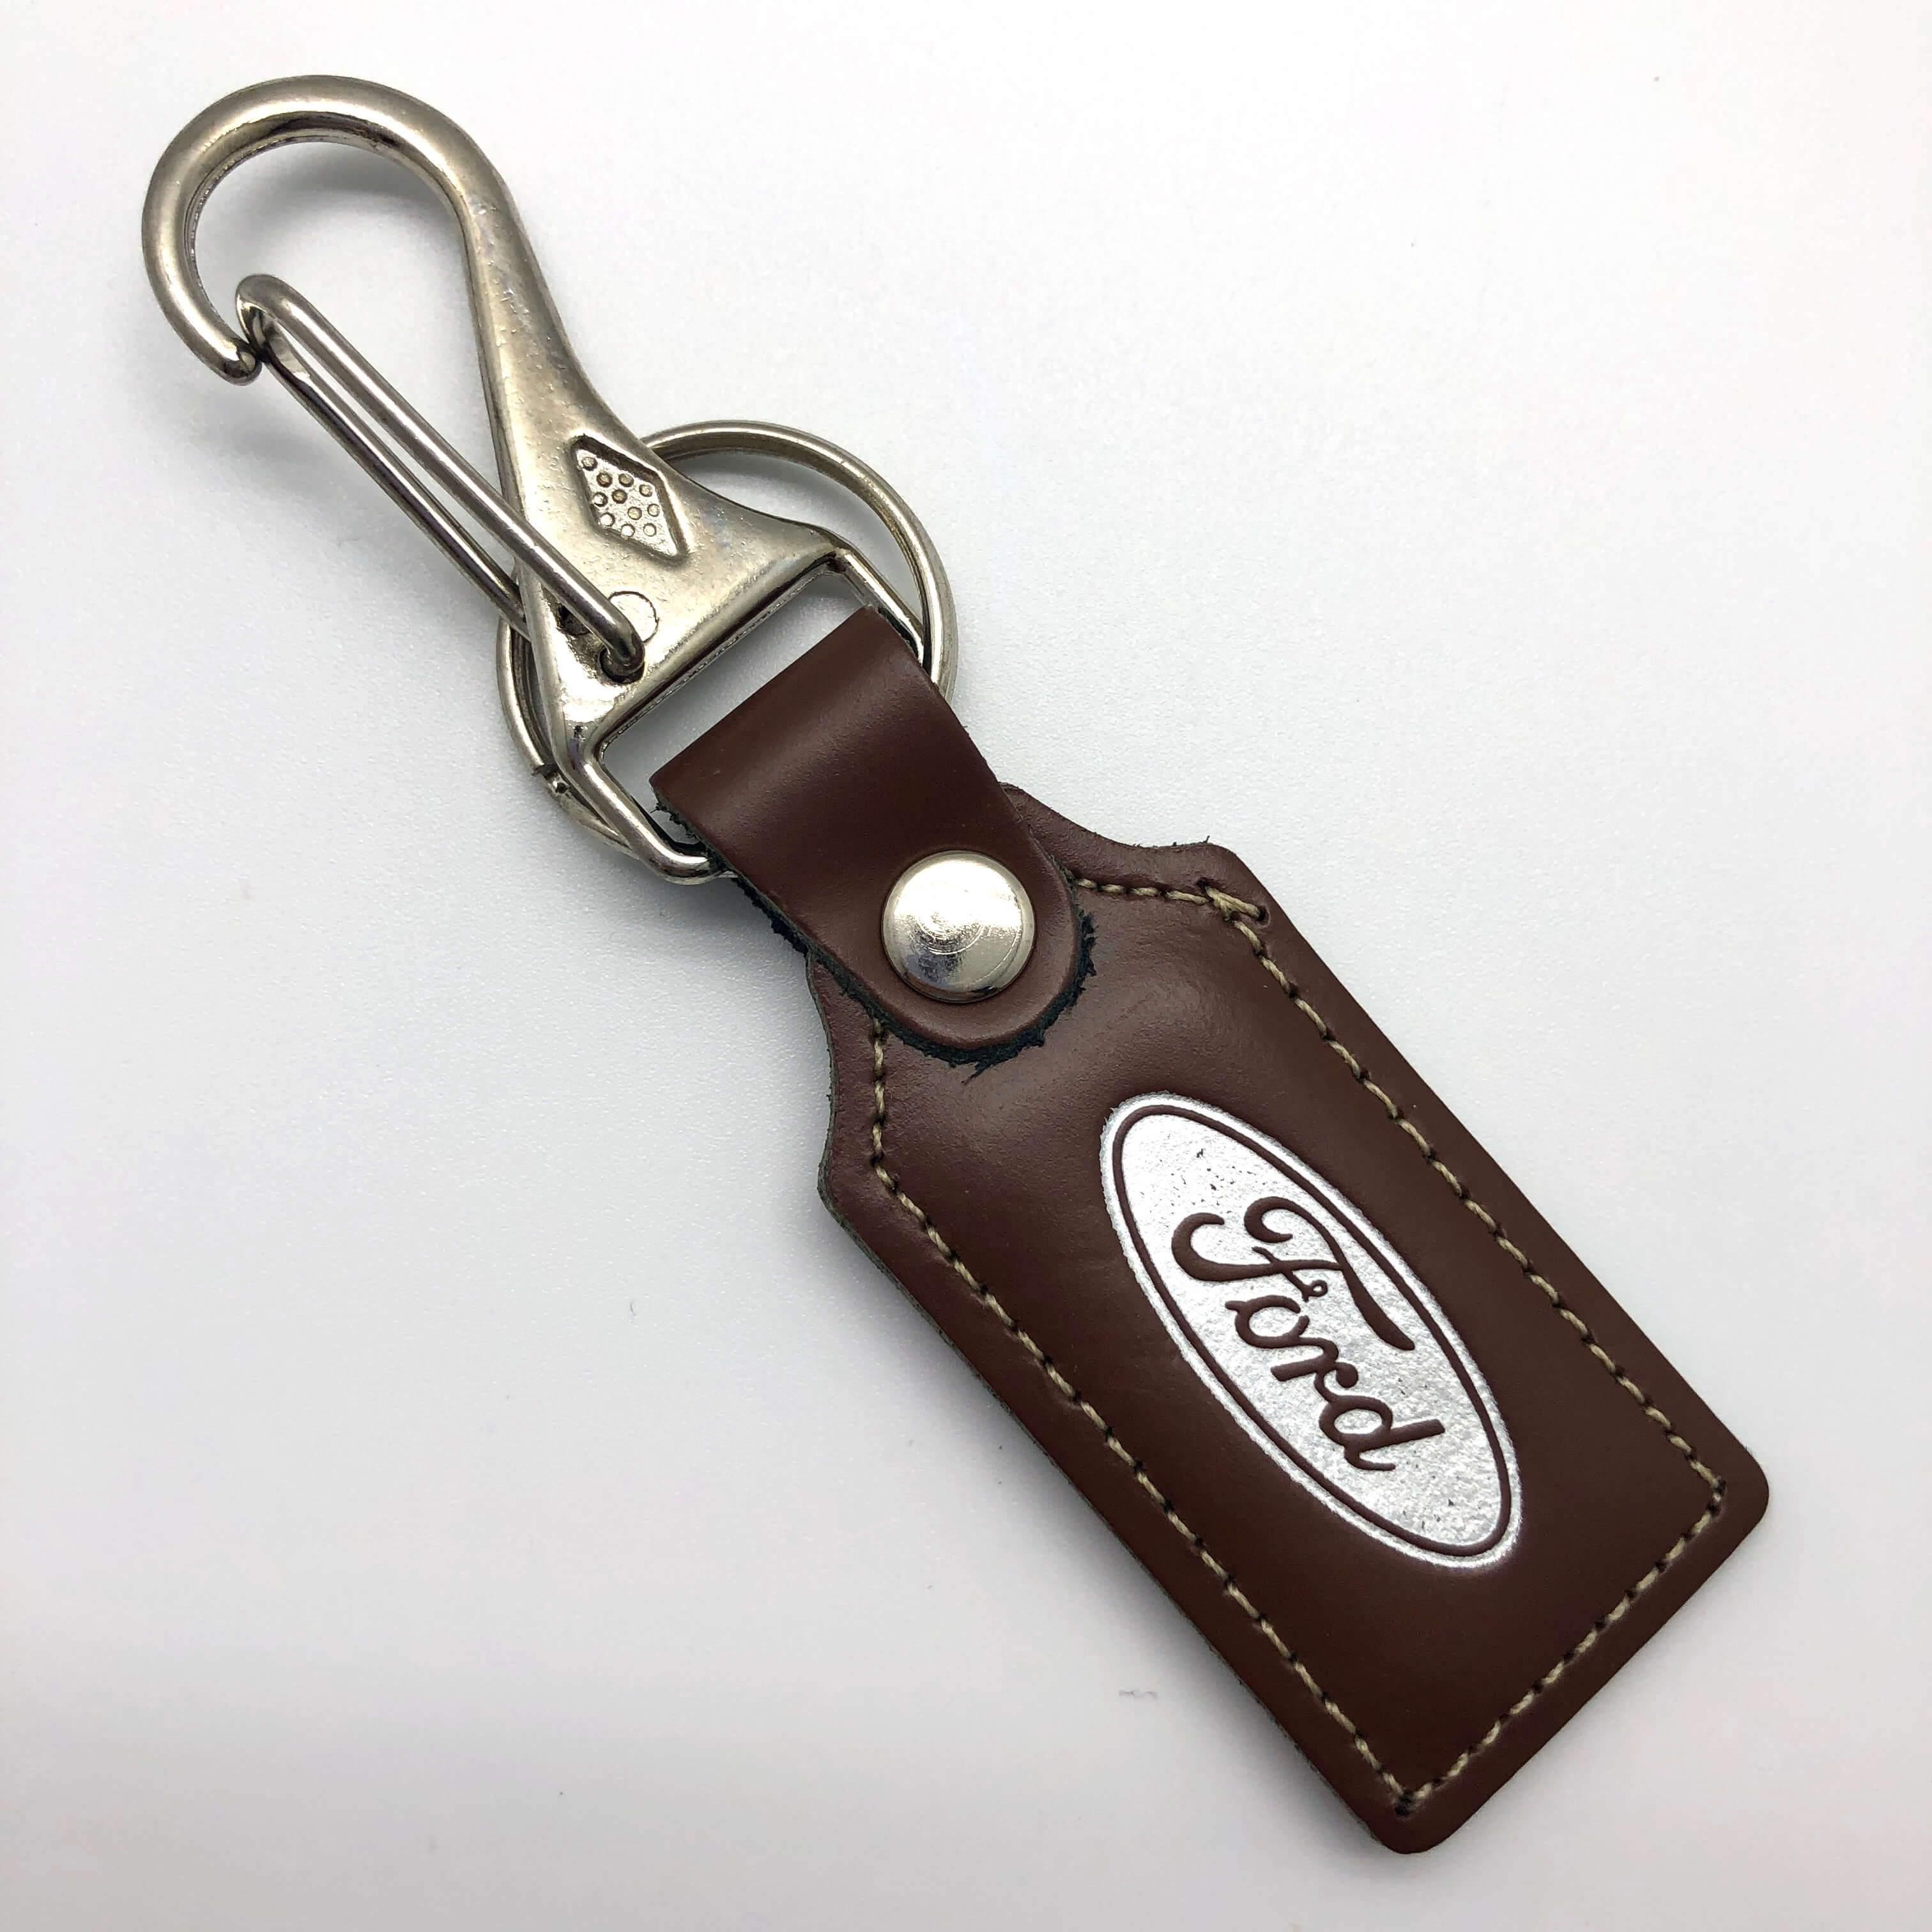 Ford Leather Key Ring